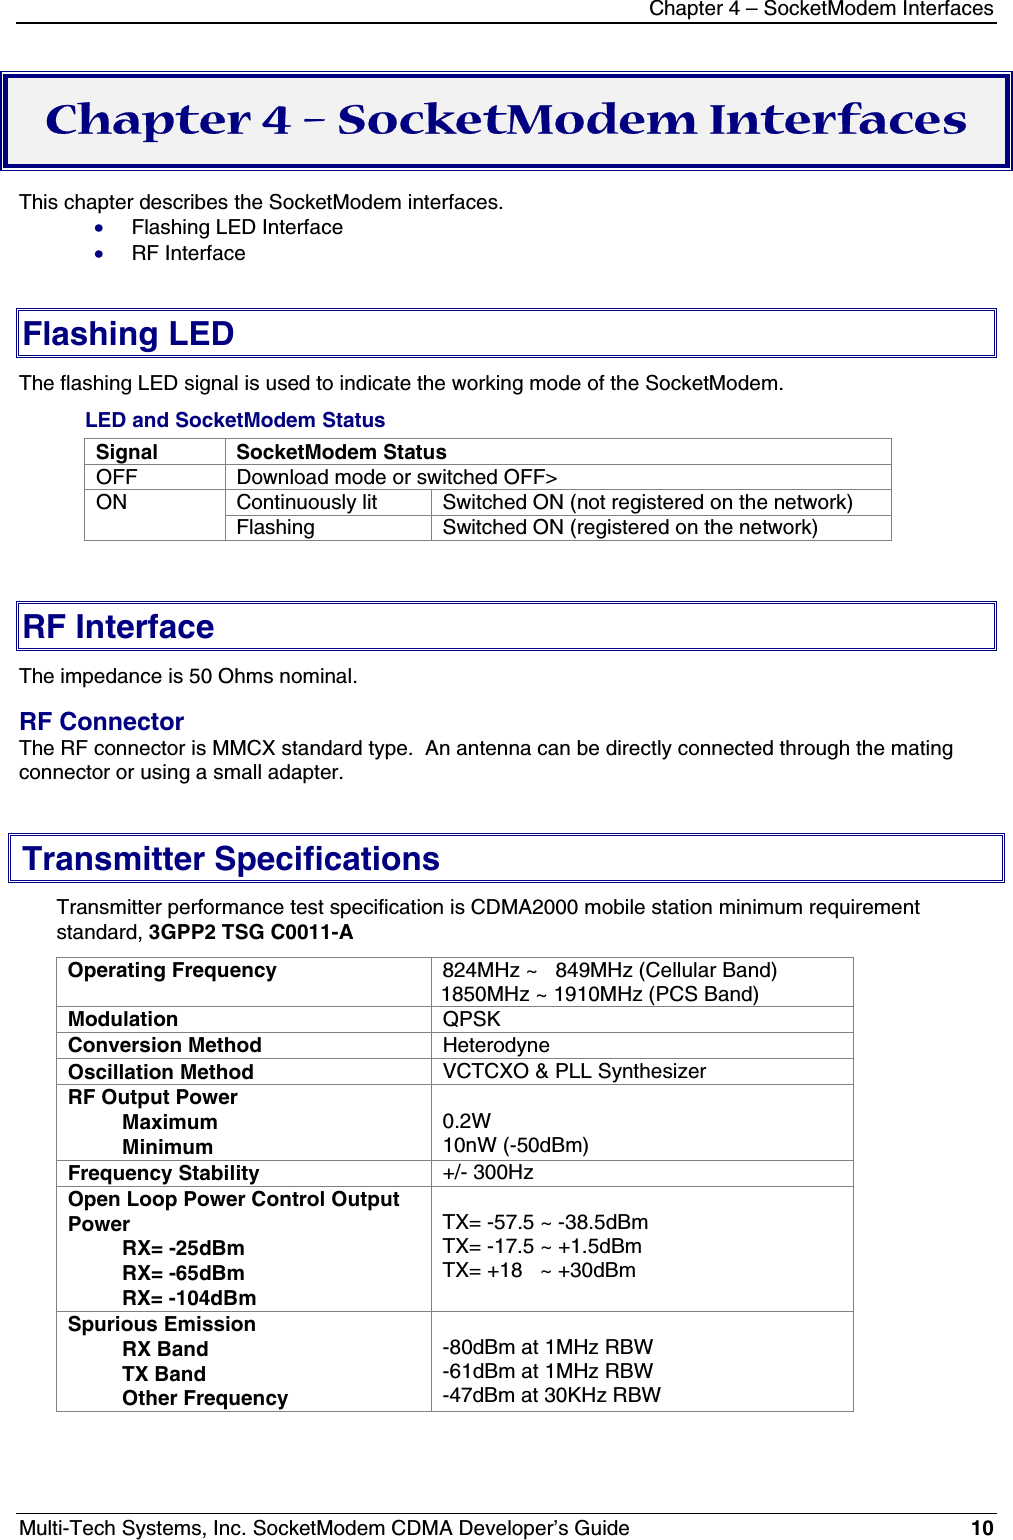 Chapter 4 – SocketModem InterfacesMulti-Tech Systems, Inc. SocketModem CDMA Developer’s Guide 10Chapter 4 – SocketModem InterfacesThis chapter describes the SocketModem interfaces.· Flashing LED Interface· RF InterfaceFlashing LEDThe flashing LED signal is used to indicate the working mode of the SocketModem.LED and SocketModem StatusSignal SocketModem StatusOFF Download mode or switched OFF&gt;Continuously lit Switched ON (not registered on the network)ONFlashing Switched ON (registered on the network)RF InterfaceThe impedance is 50 Ohms nominal.RF ConnectorThe RF connector is MMCX standard type.  An antenna can be directly connected through the matingconnector or using a small adapter.Transmitter SpecificationsTransmitter performance test specification is CDMA2000 mobile station minimum requirementstandard, 3GPP2 TSG C0011-AOperating Frequency 824MHz ~   849MHz (Cellular Band)1850MHz ~ 1910MHz (PCS Band)Modulation QPSKConversion Method HeterodyneOscillation Method VCTCXO &amp; PLL SynthesizerRF Output PowerMaximumMinimum0.2W10nW (-50dBm)Frequency Stability +/- 300HzOpen Loop Power Control OutputPowerRX= -25dBmRX= -65dBmRX= -104dBmTX= -57.5 ~ -38.5dBmTX= -17.5 ~ +1.5dBmTX= +18   ~ +30dBmSpurious EmissionRX BandTX BandOther Frequency-80dBm at 1MHz RBW-61dBm at 1MHz RBW-47dBm at 30KHz RBW